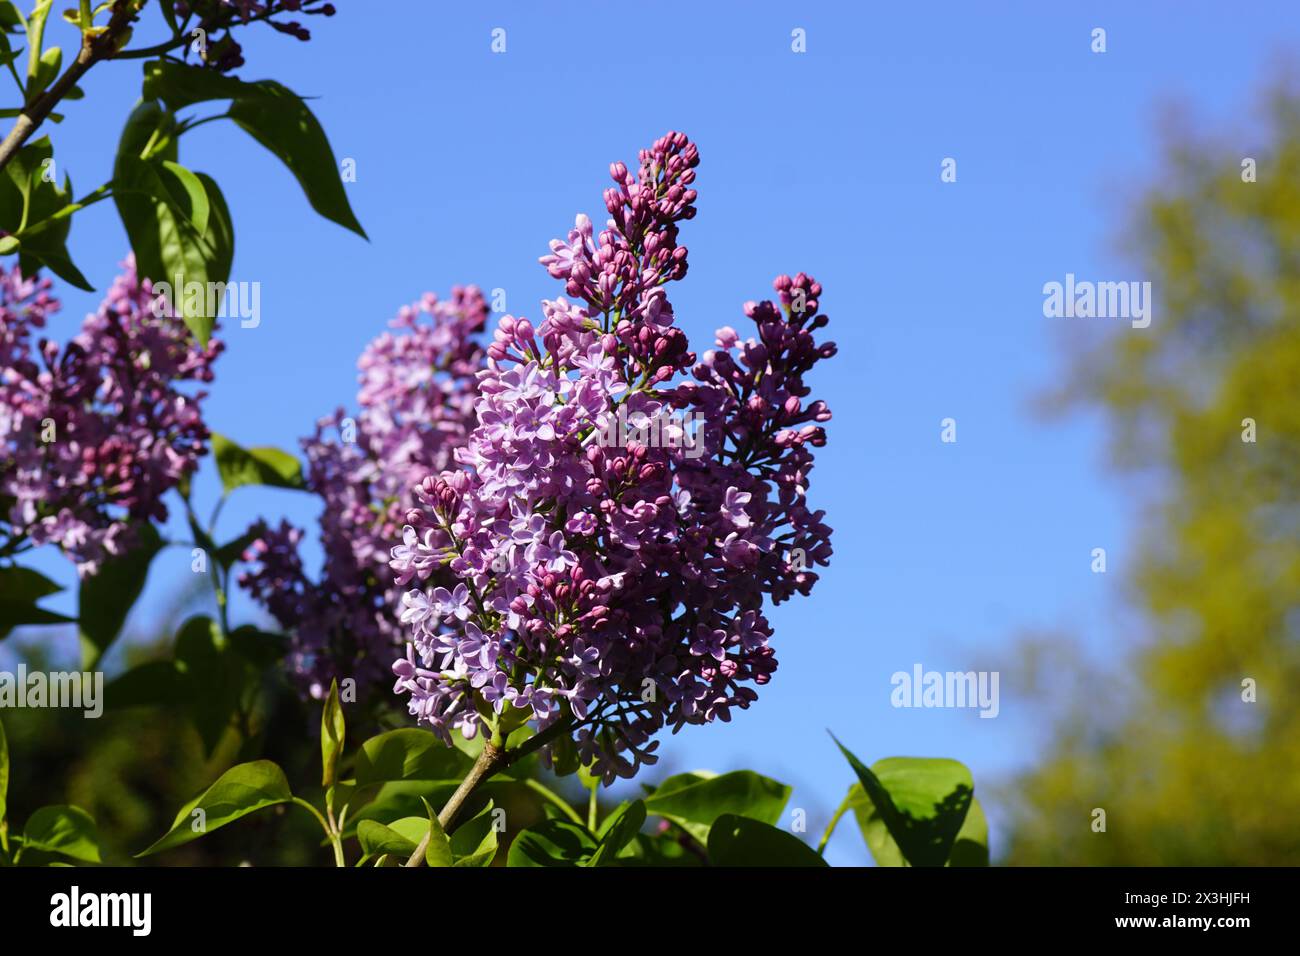 Flowers of lilac or common lilac (Syringa vulgaris), olive family (Oleaceae) in a Dutch garden in the spring. Blue sky Stock Photo